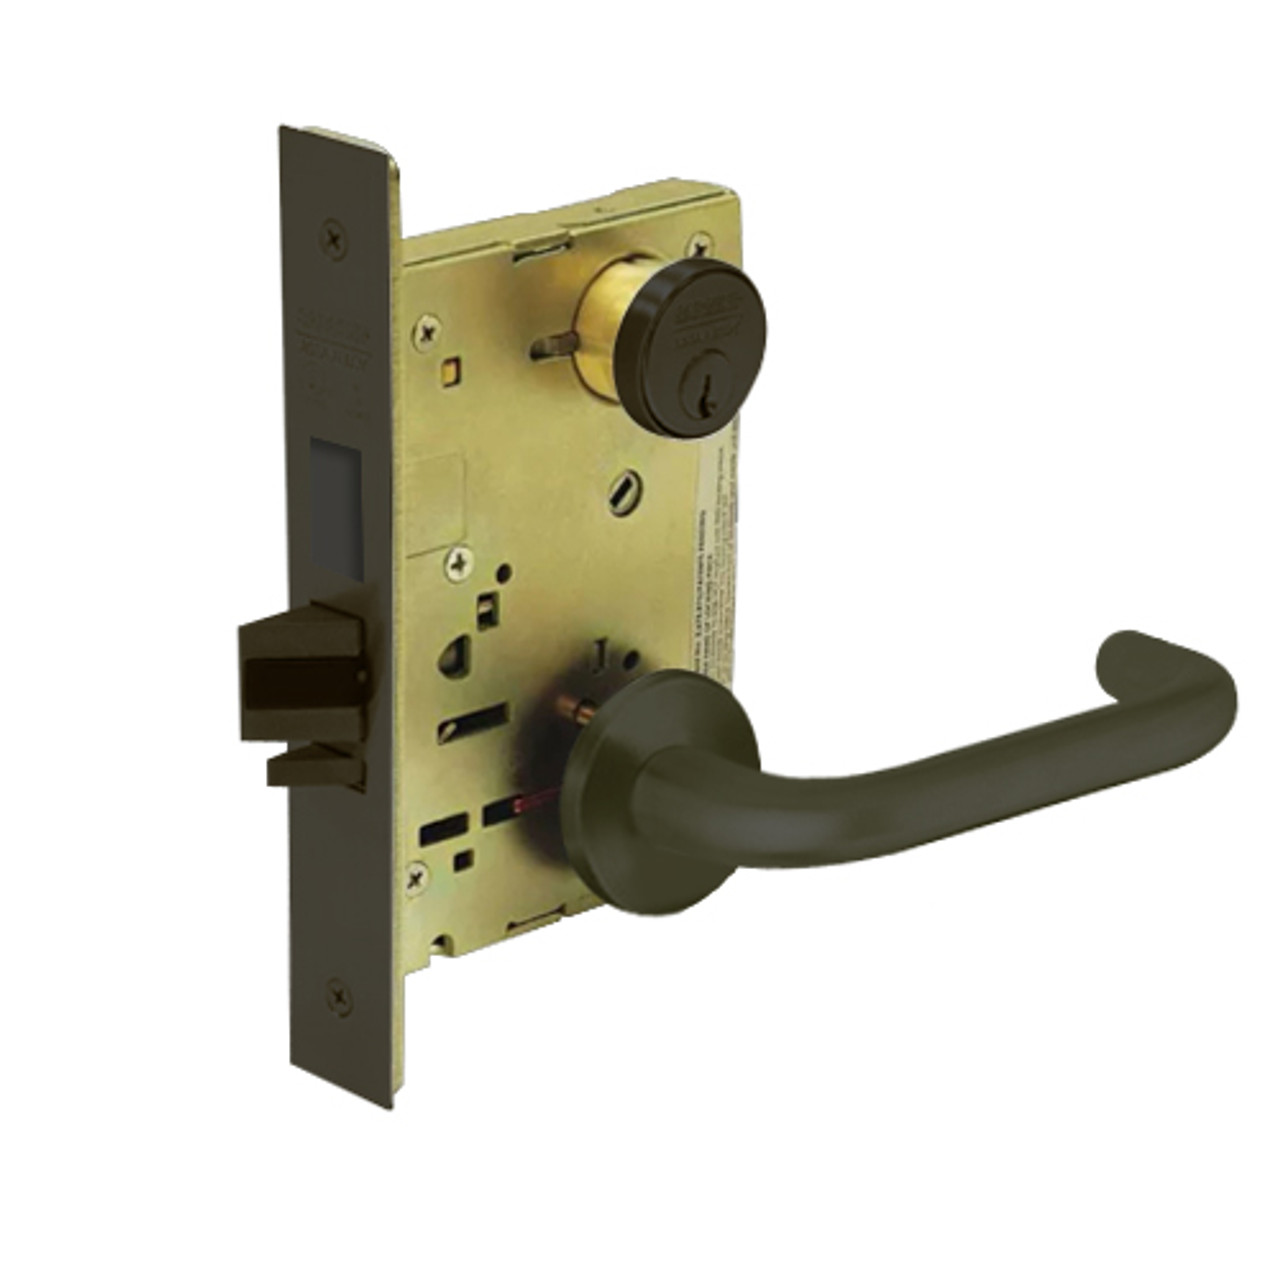 8249-LNJ-10B Sargent 8200 Series Security Deadbolt Mortise Lock with LNJ Lever Trim in Oxidized Dull Bronze